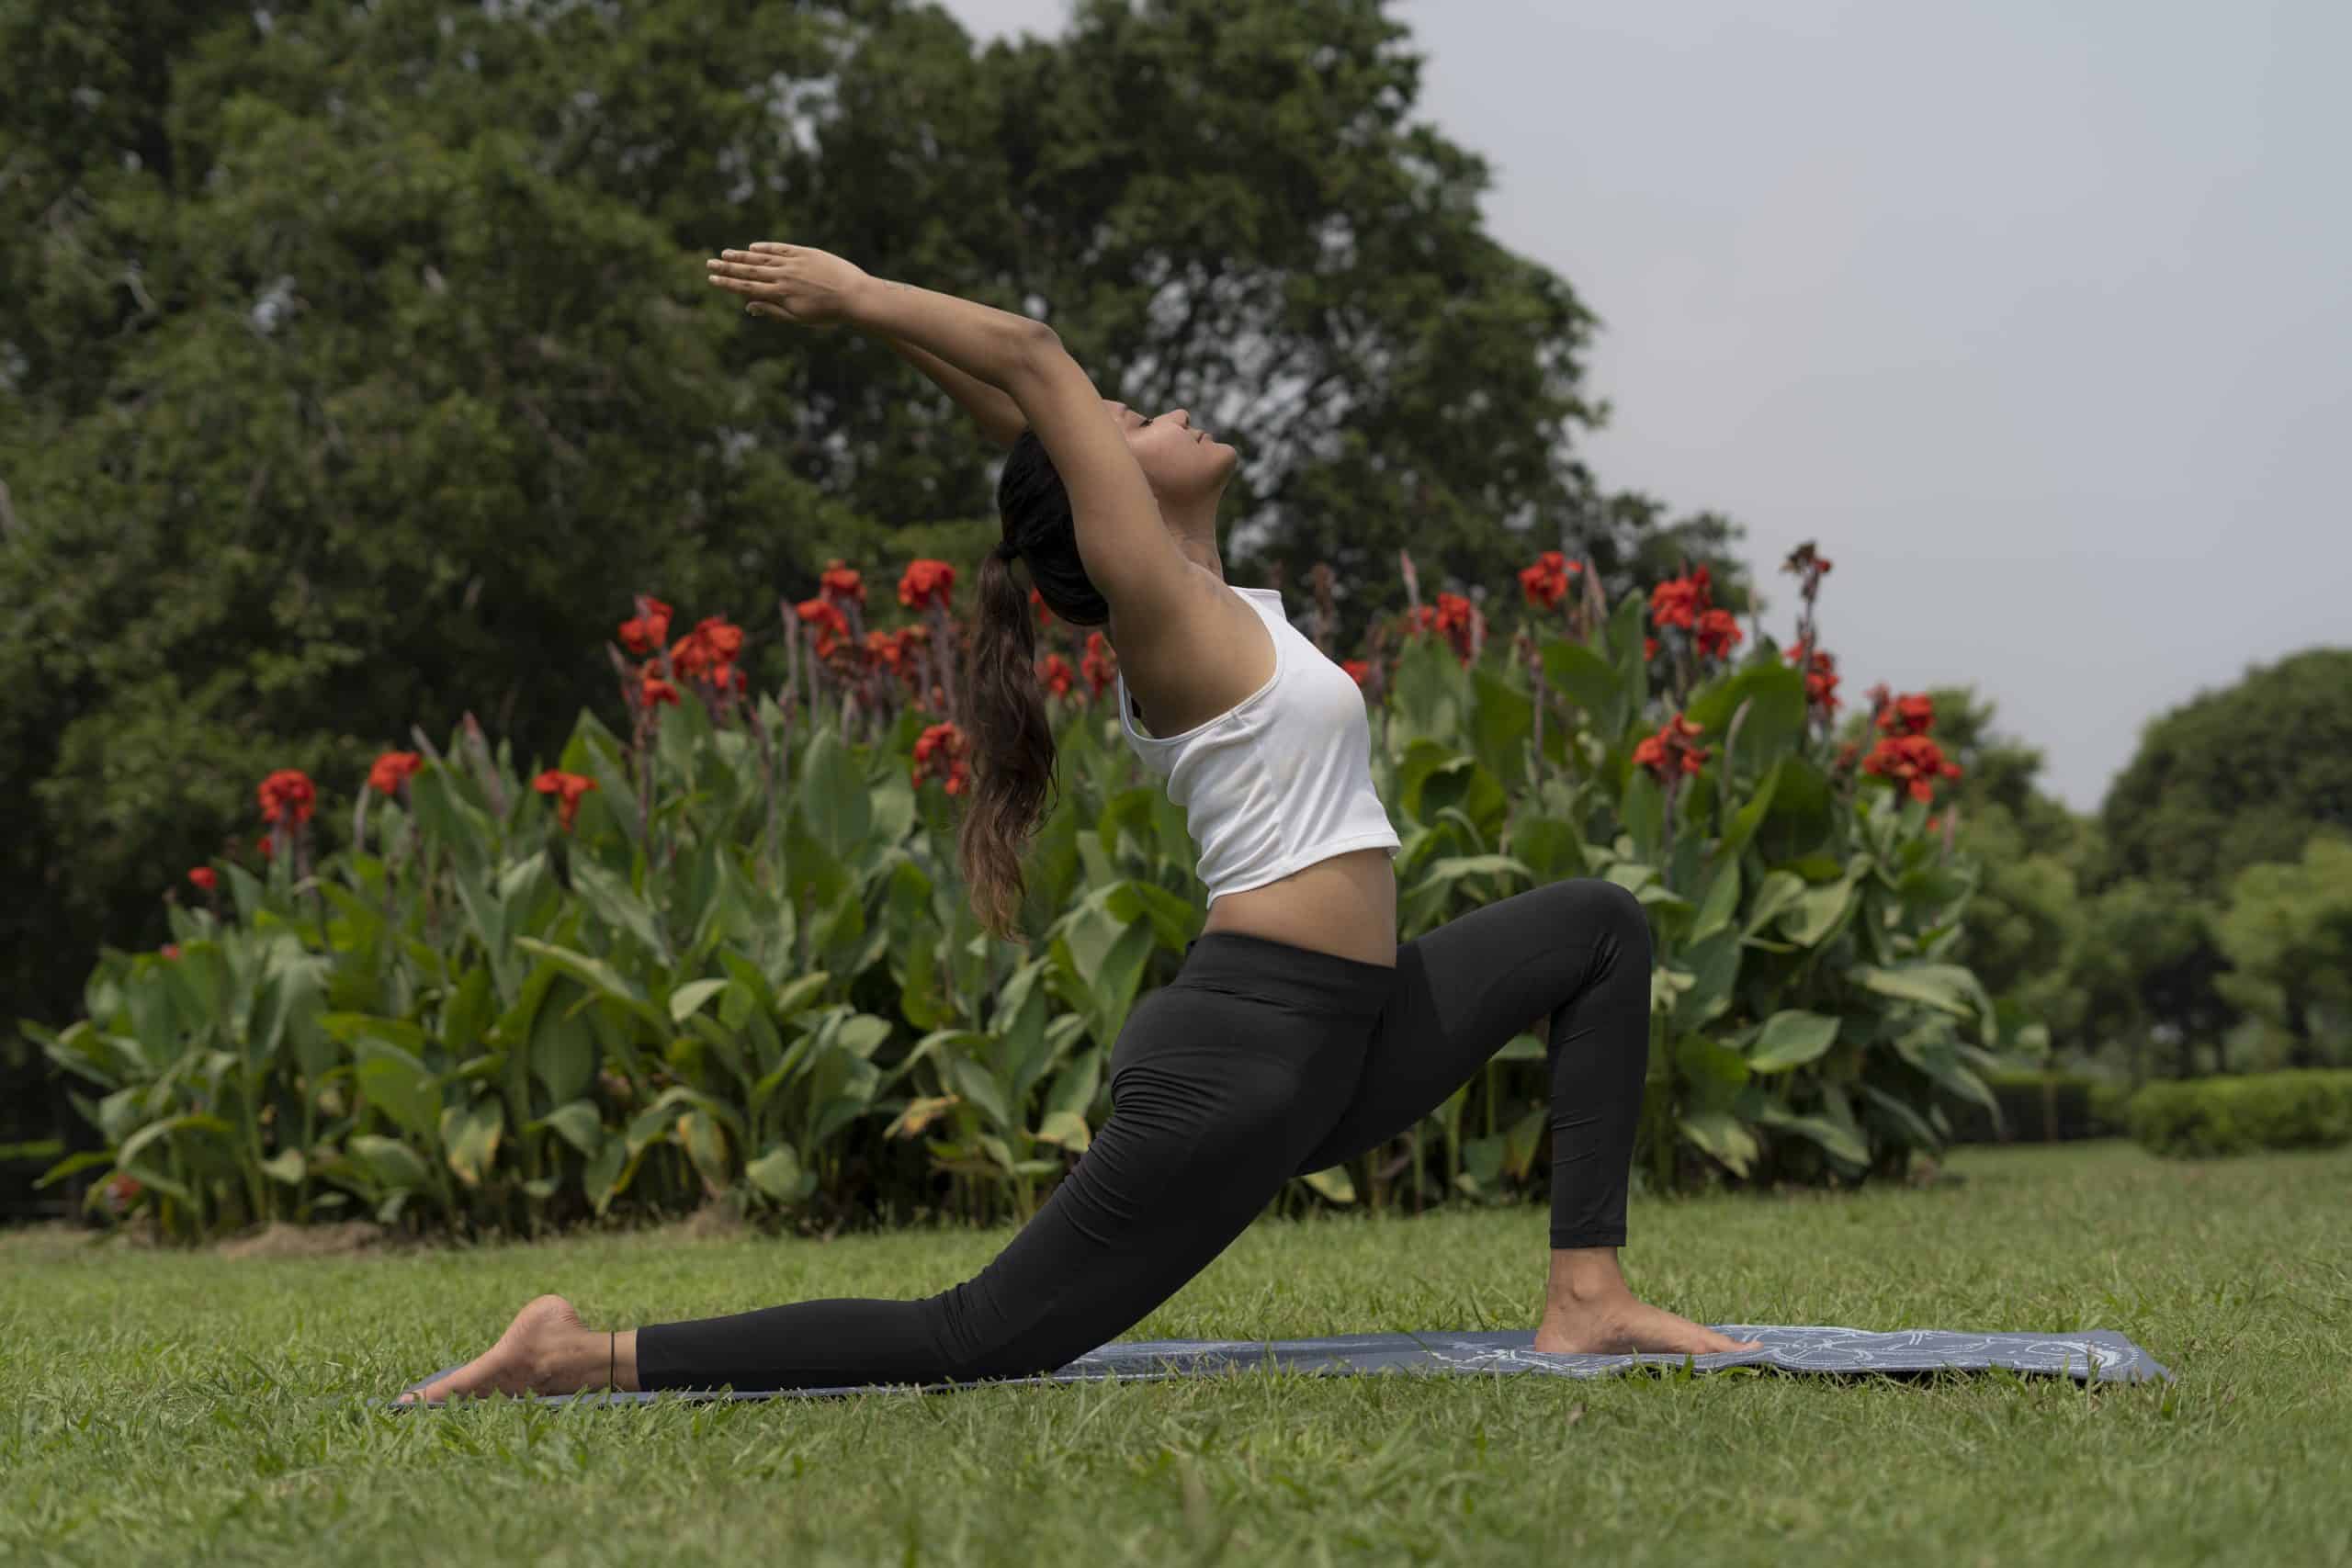 A woman doing the Warrior I pose outdoors on her yoga mat